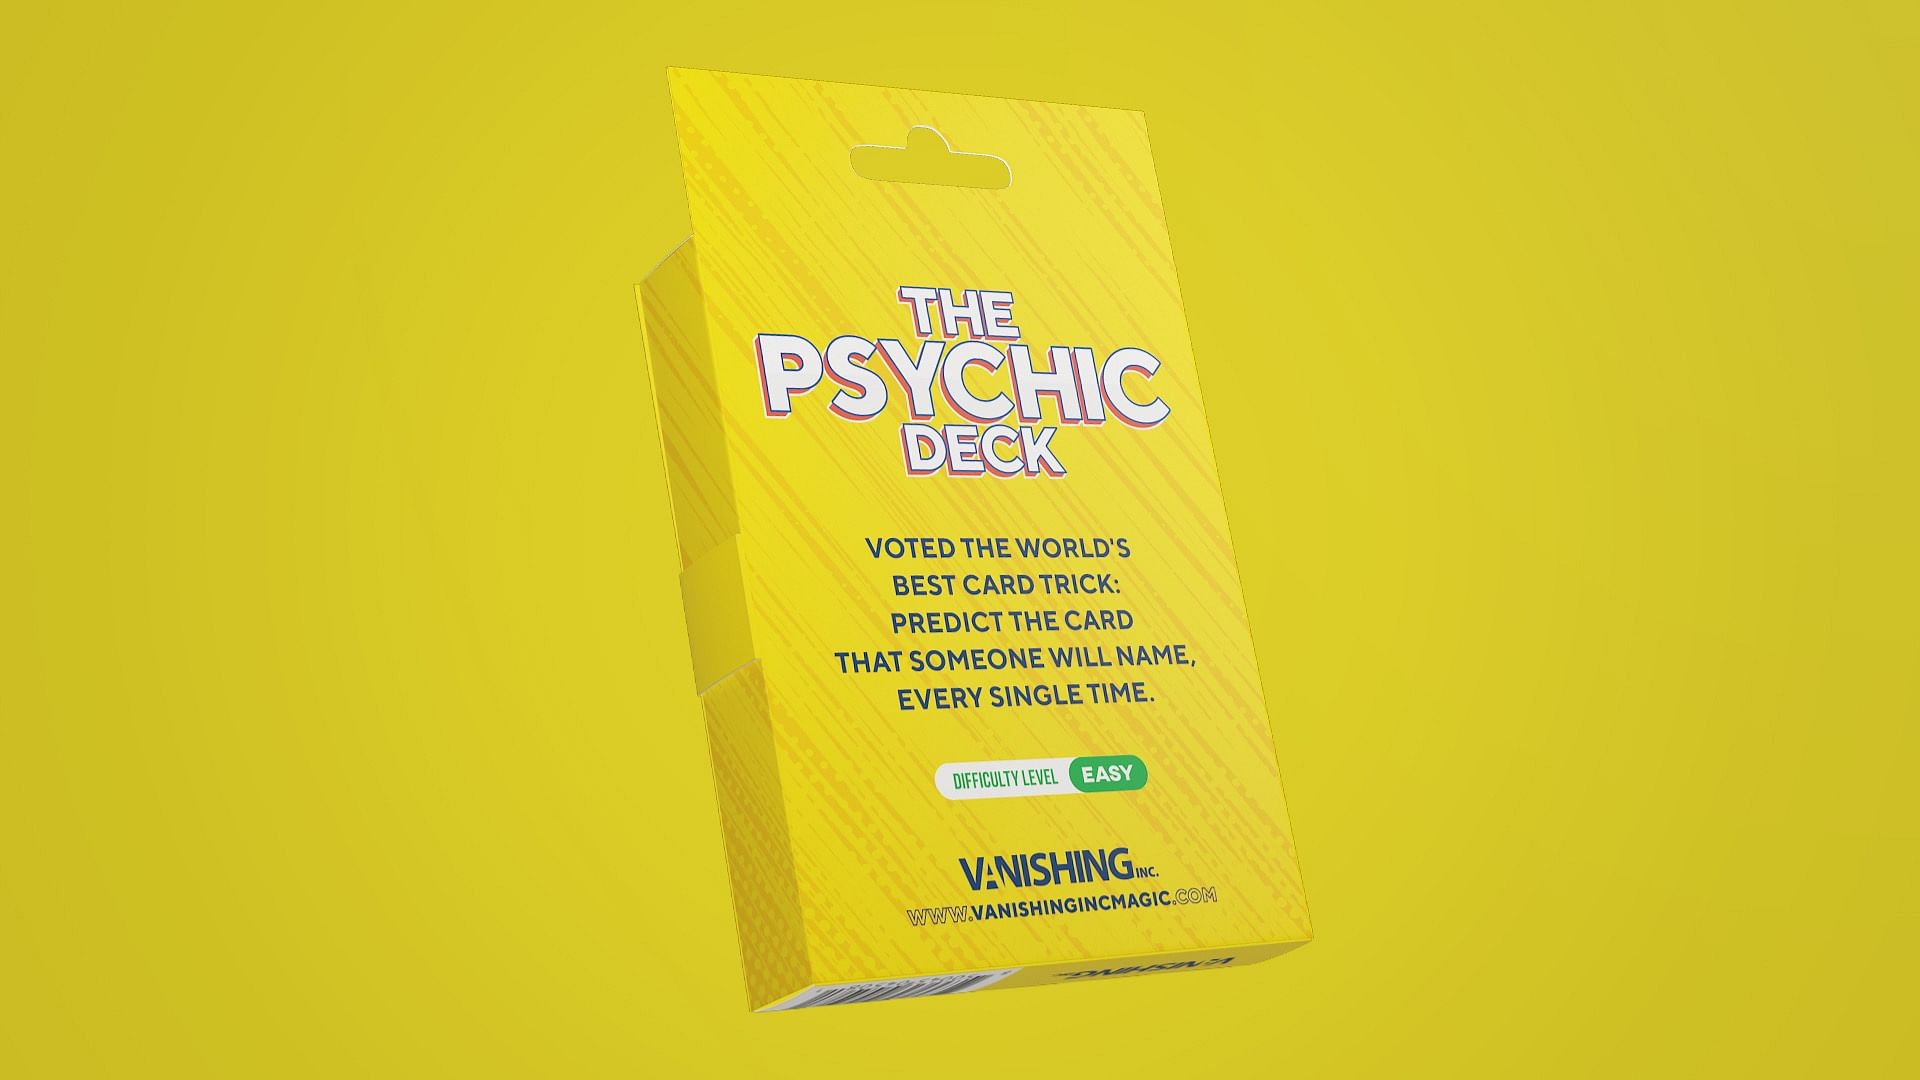 The Psychic Deck